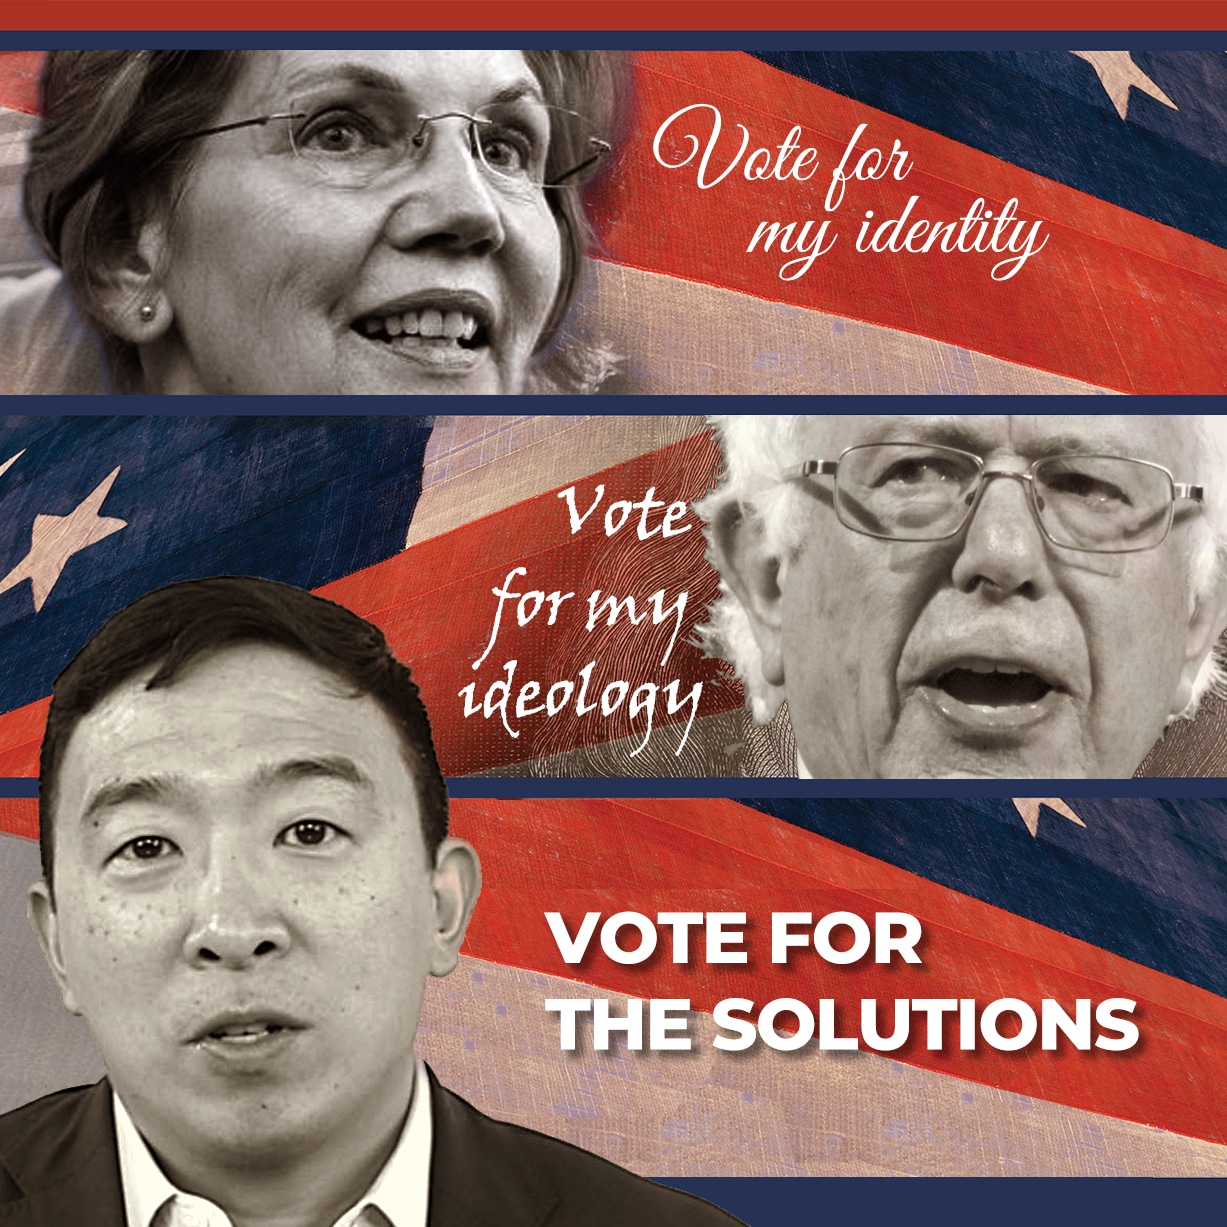 political yang-memes political text: VOTE FOR SOLUTIONS 